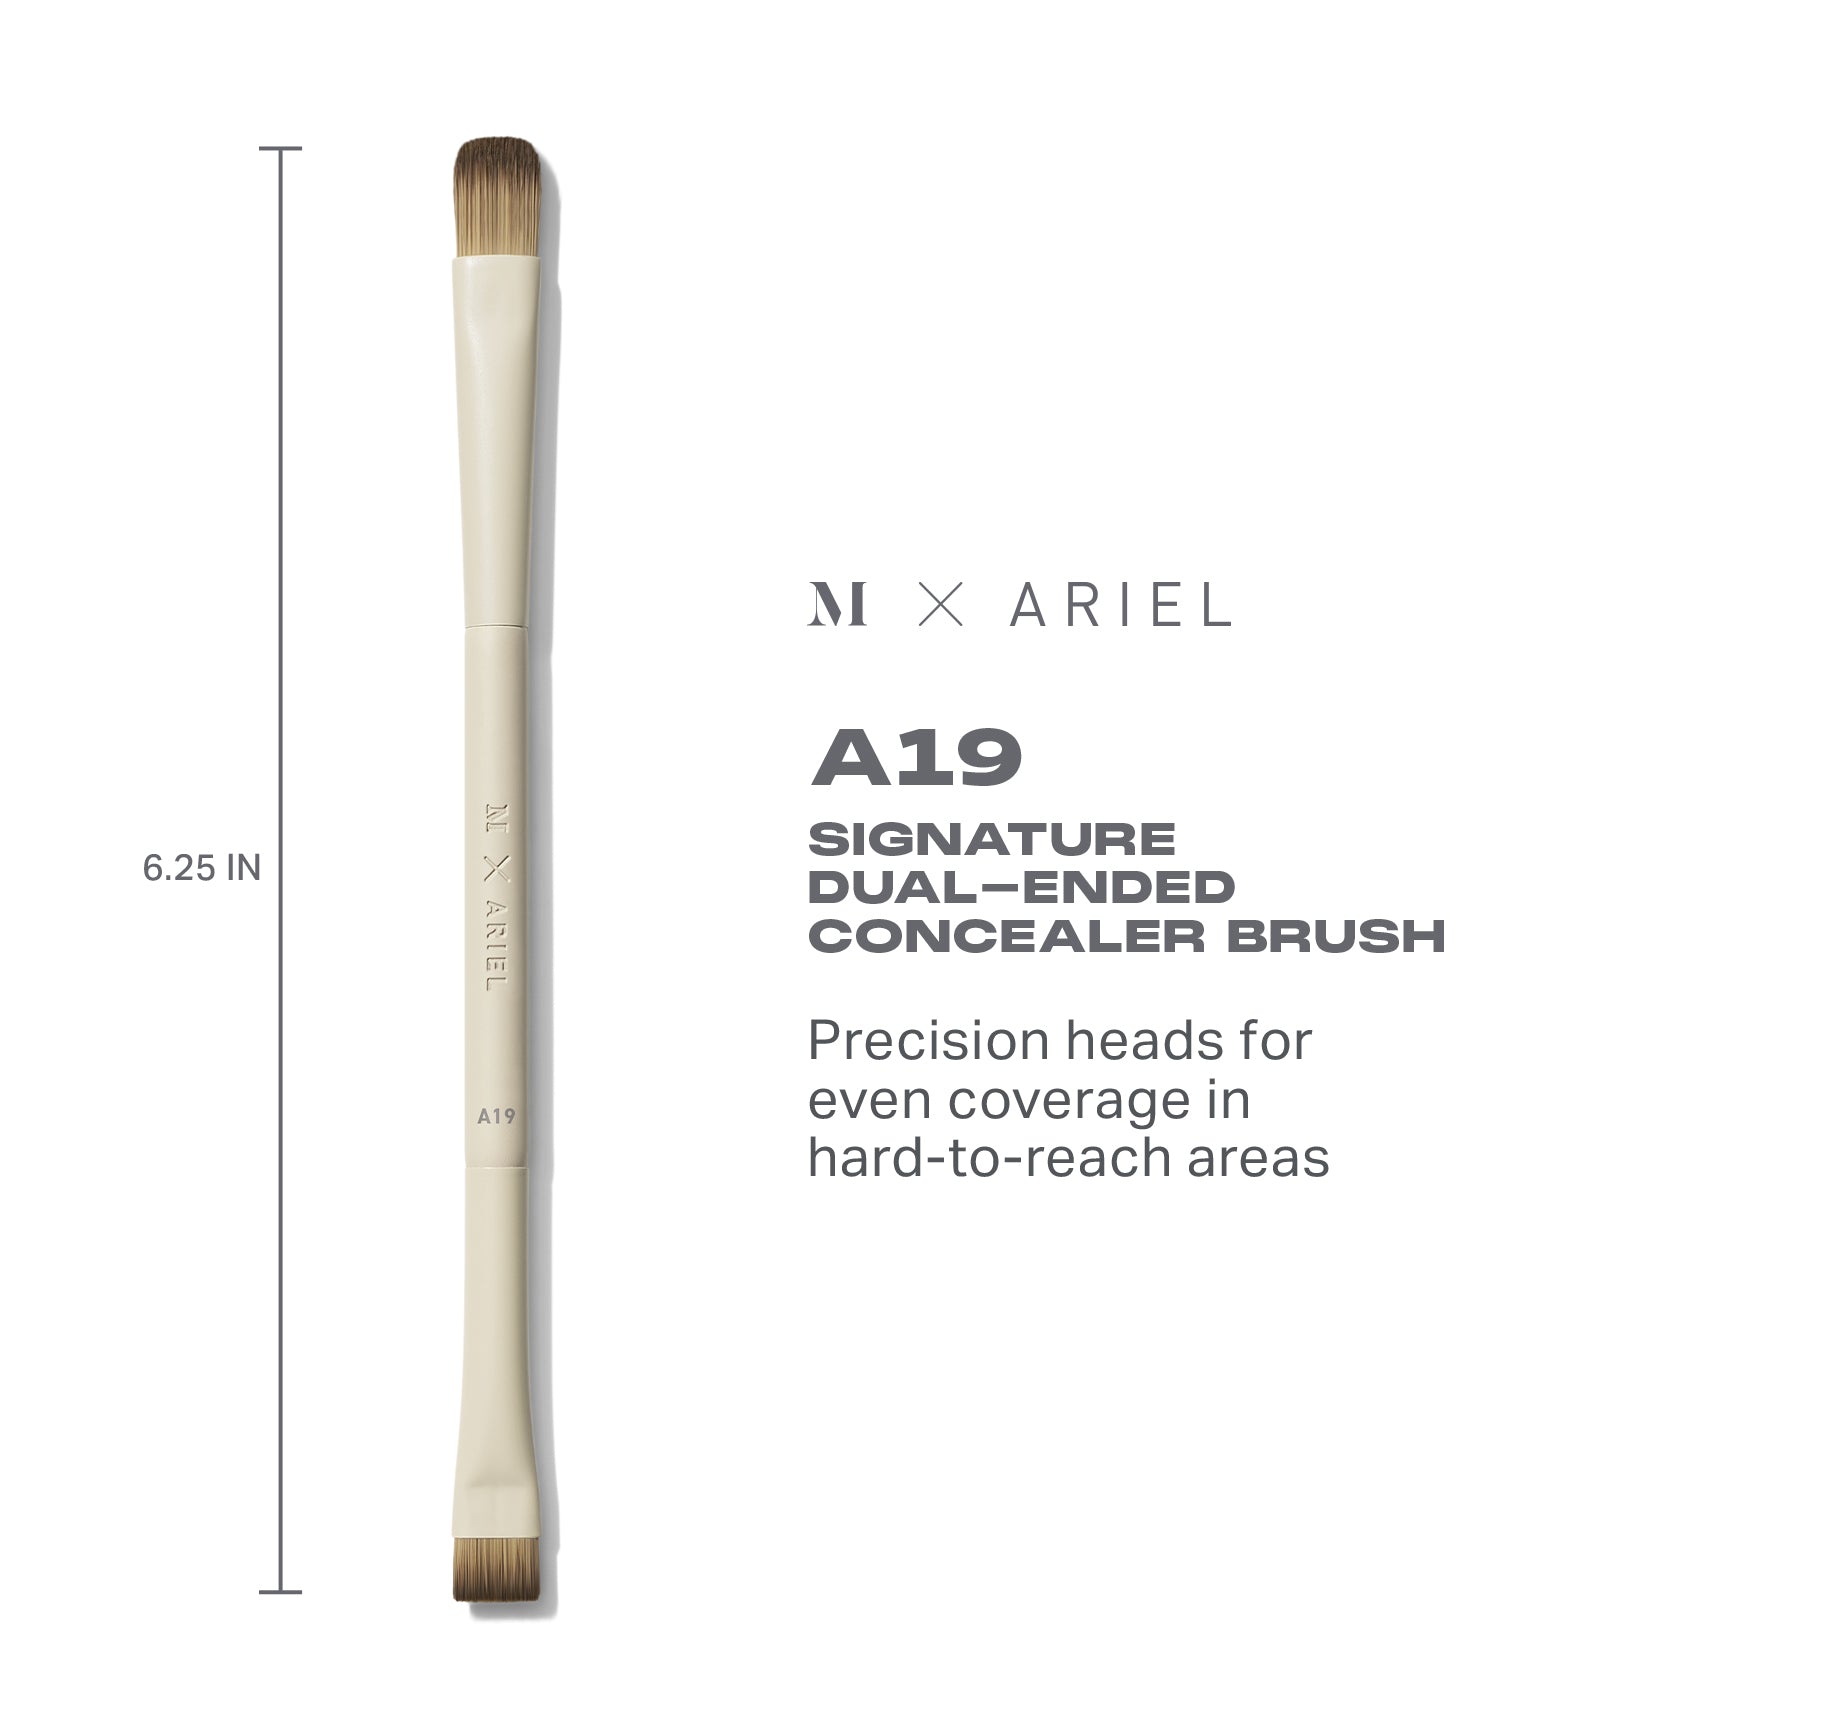 Morphe X Ariel A19 Signature Dual-Ended Concealer Brush - Image 4